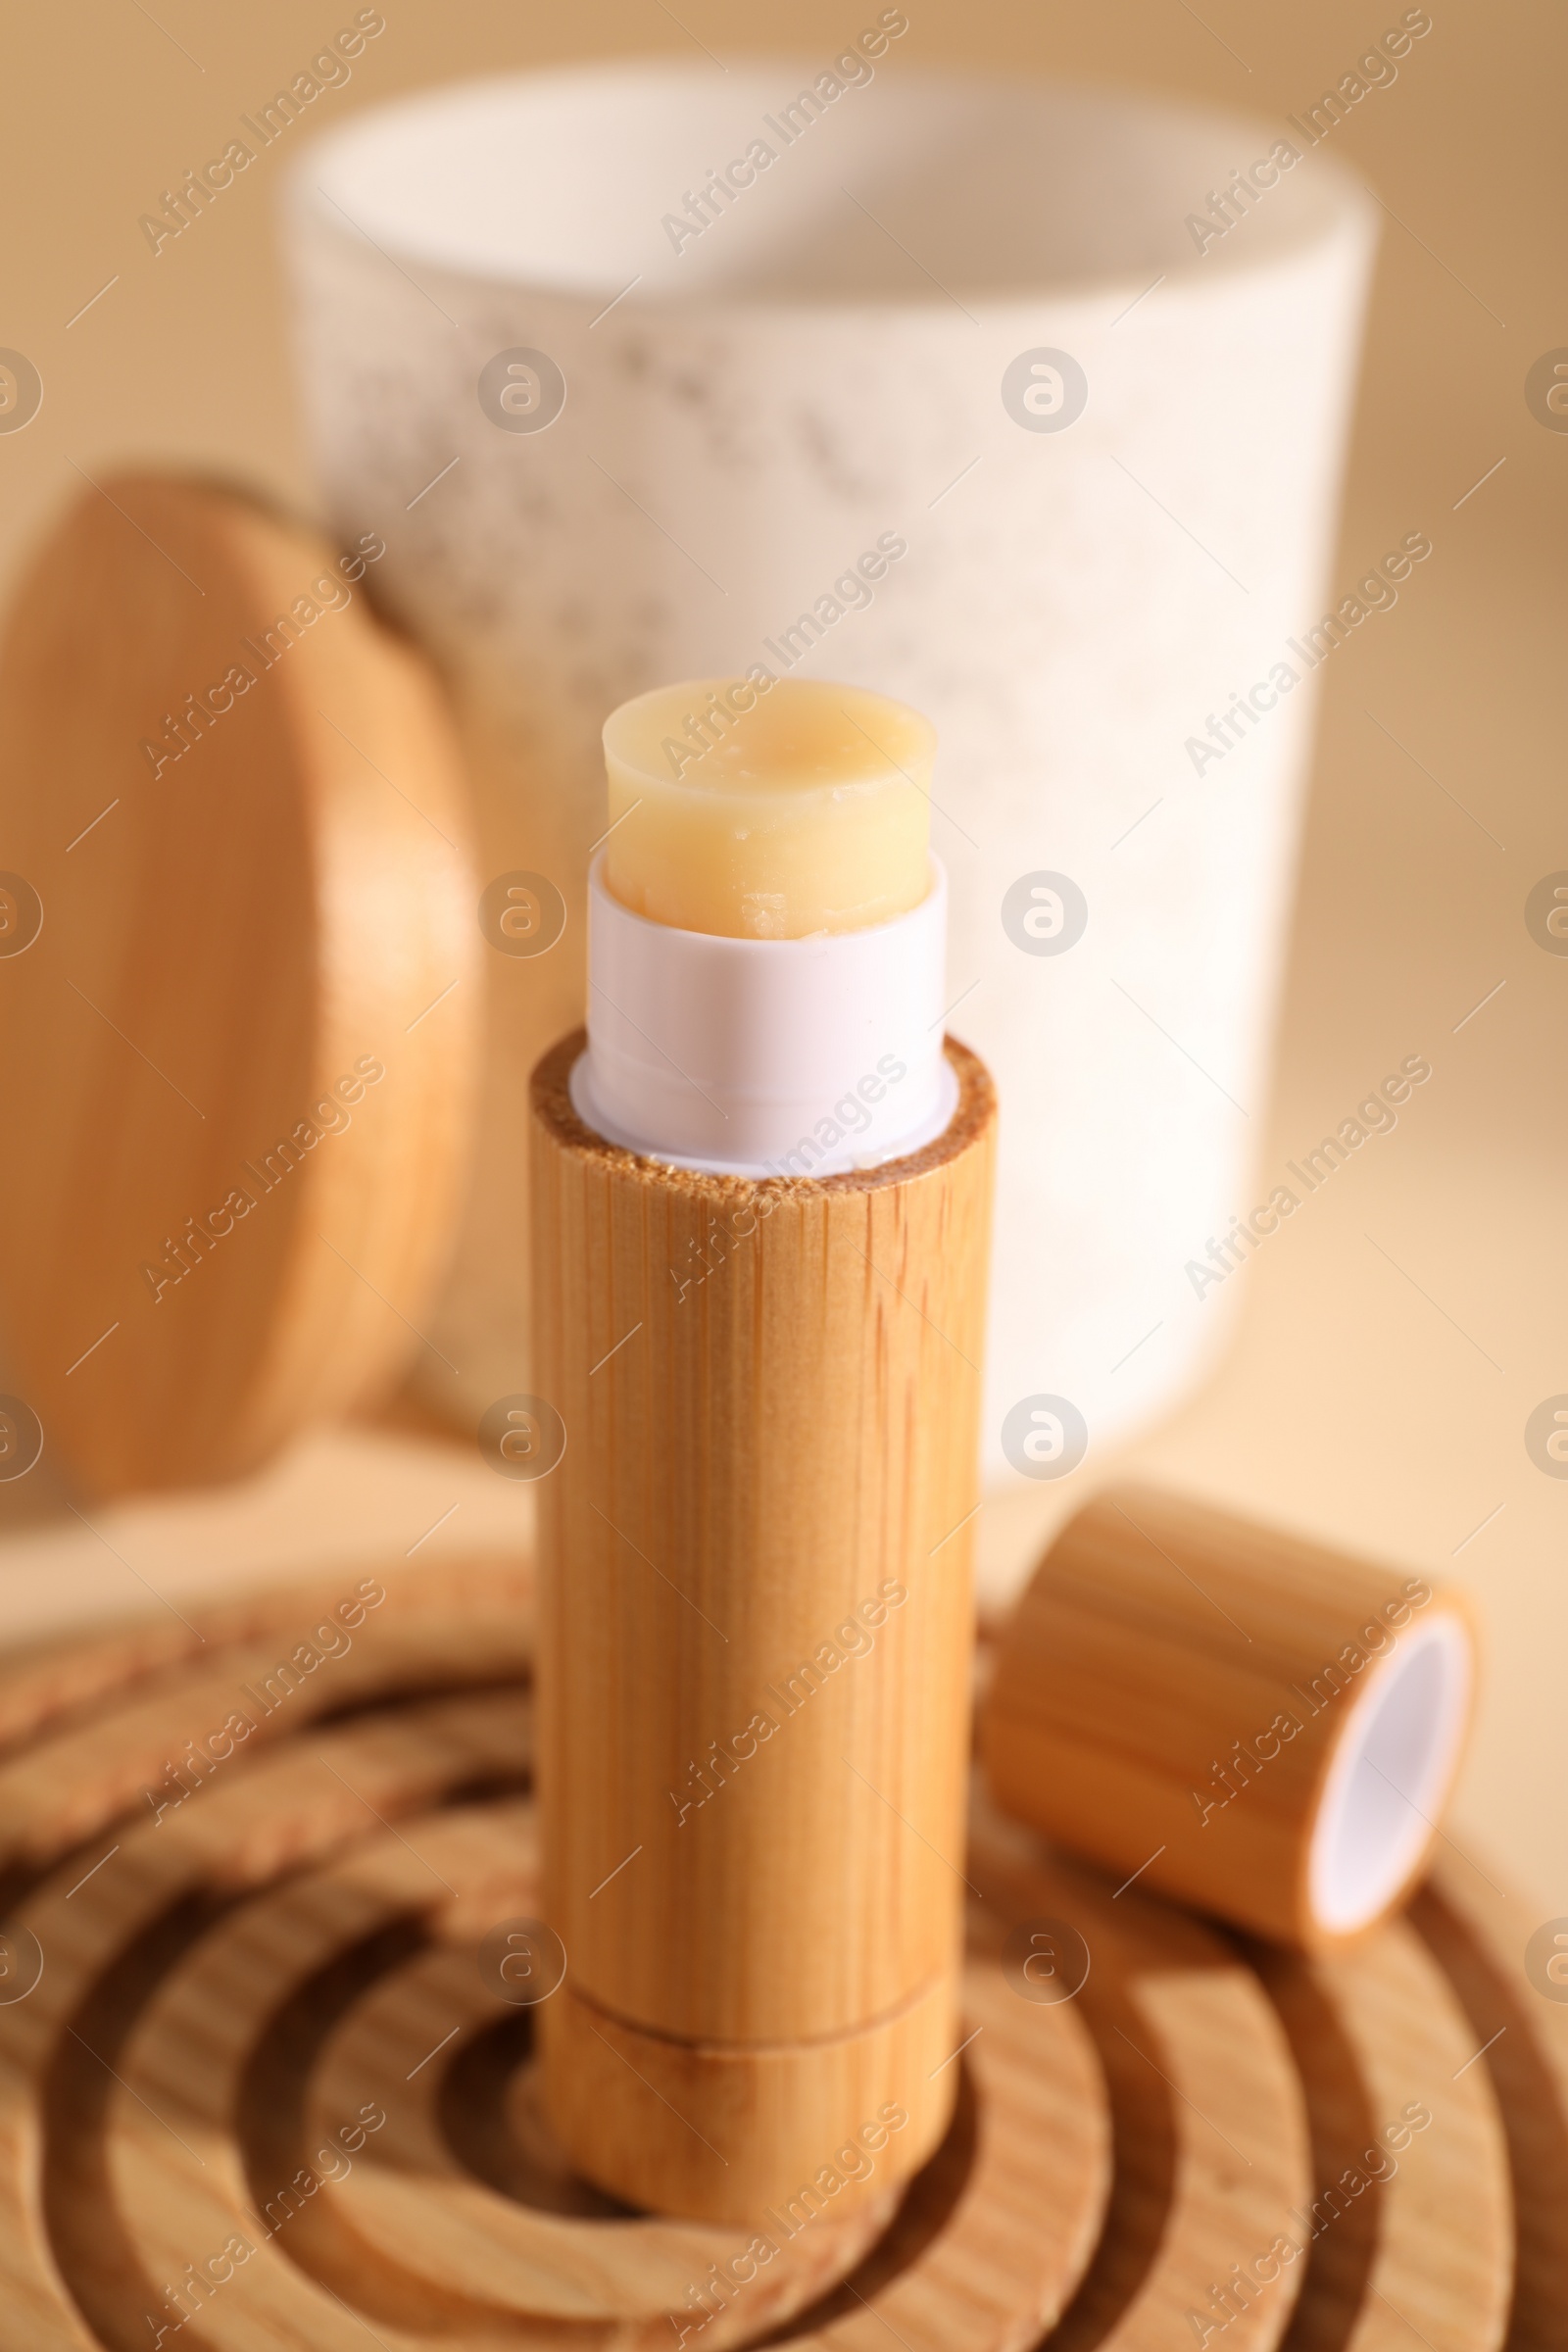 Photo of Lip balm on wooden coaster against blurred background, closeup